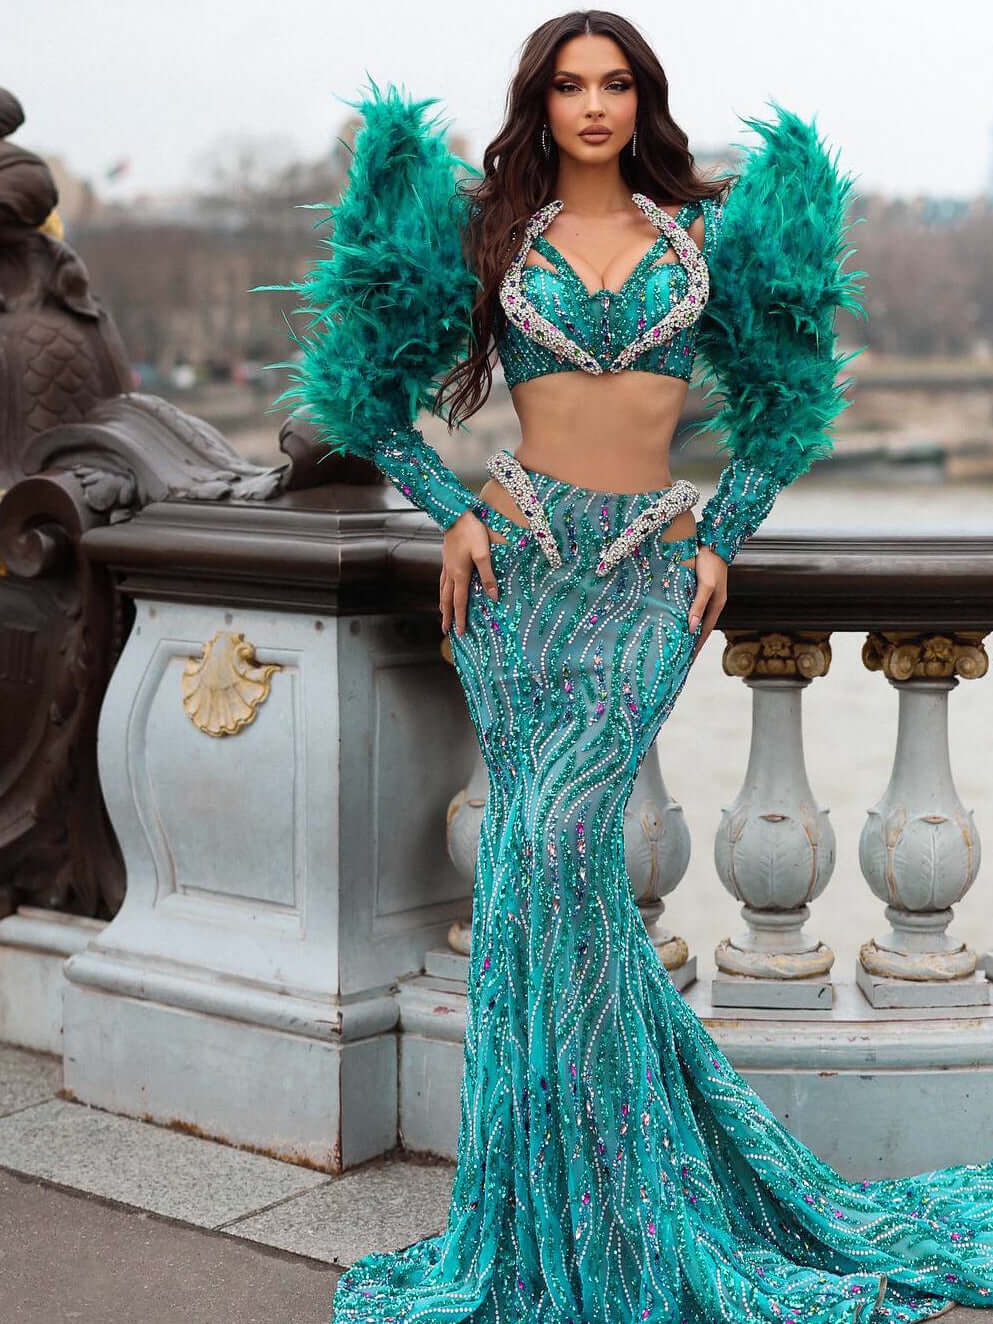 Elegant mermaid gown with long sleeves adorned with feathers and sequins